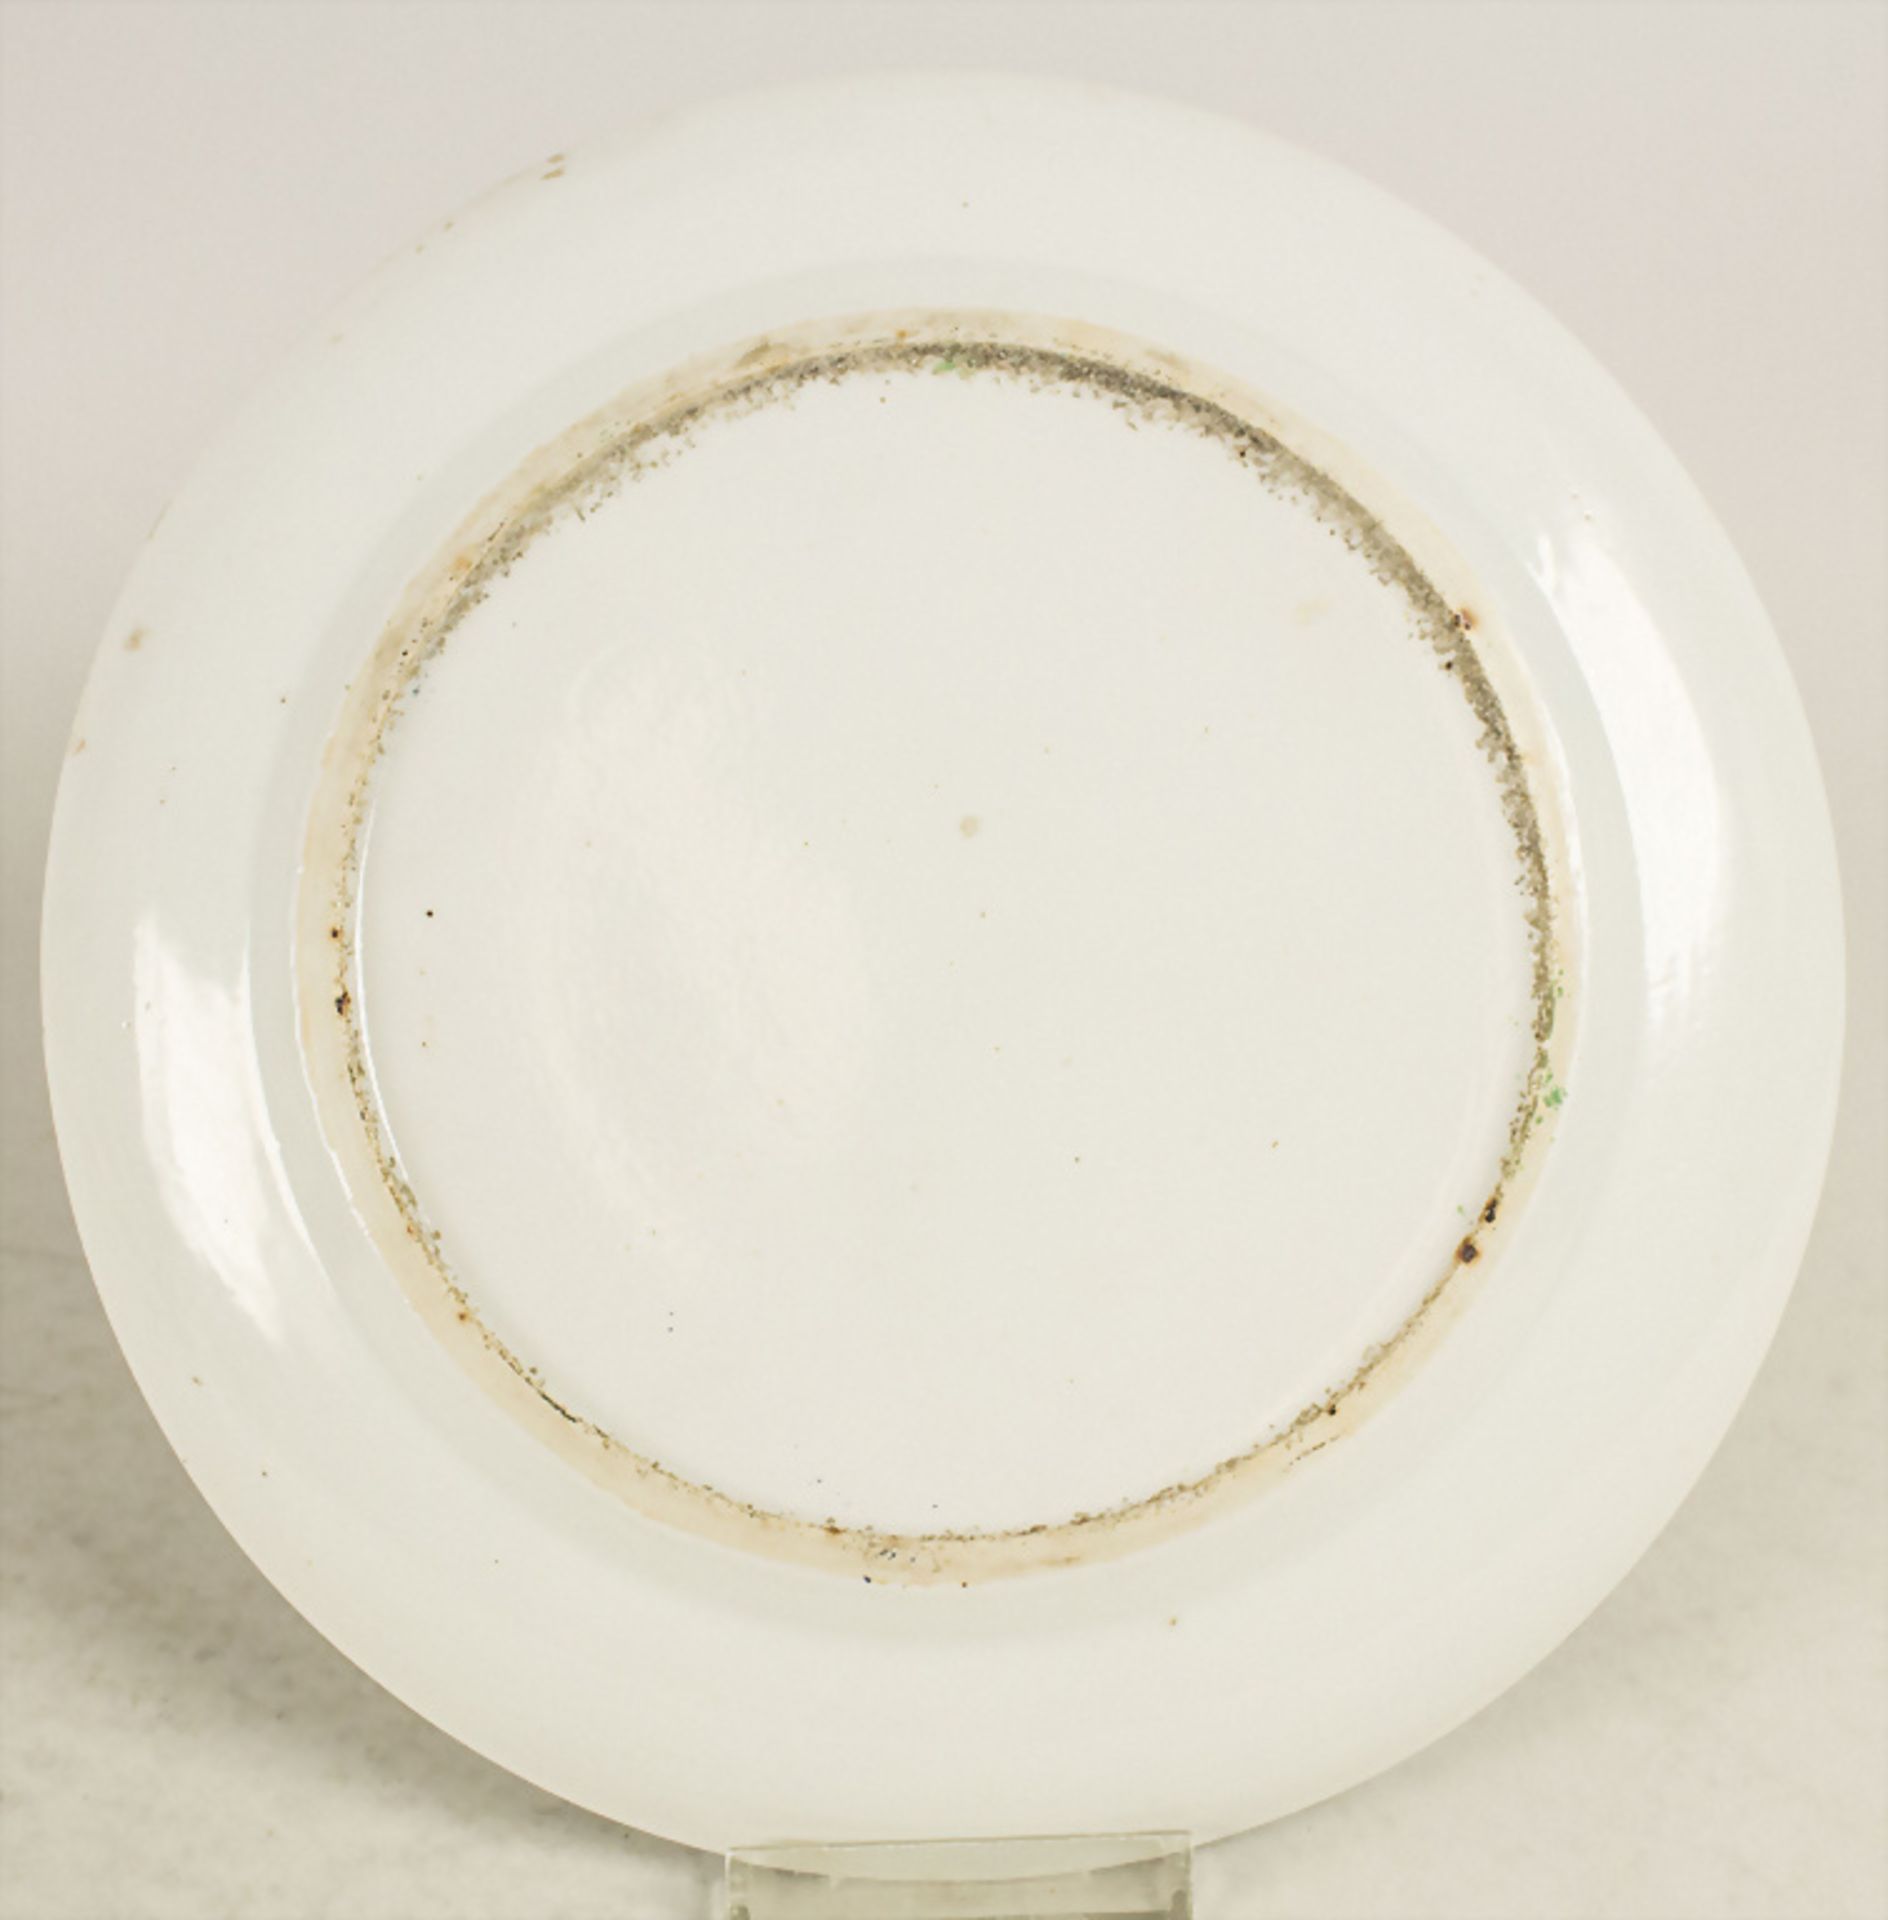 Teller / A plate, China, Qing Dynastie (1644-1911), 18./19. Jh. - Image 2 of 2